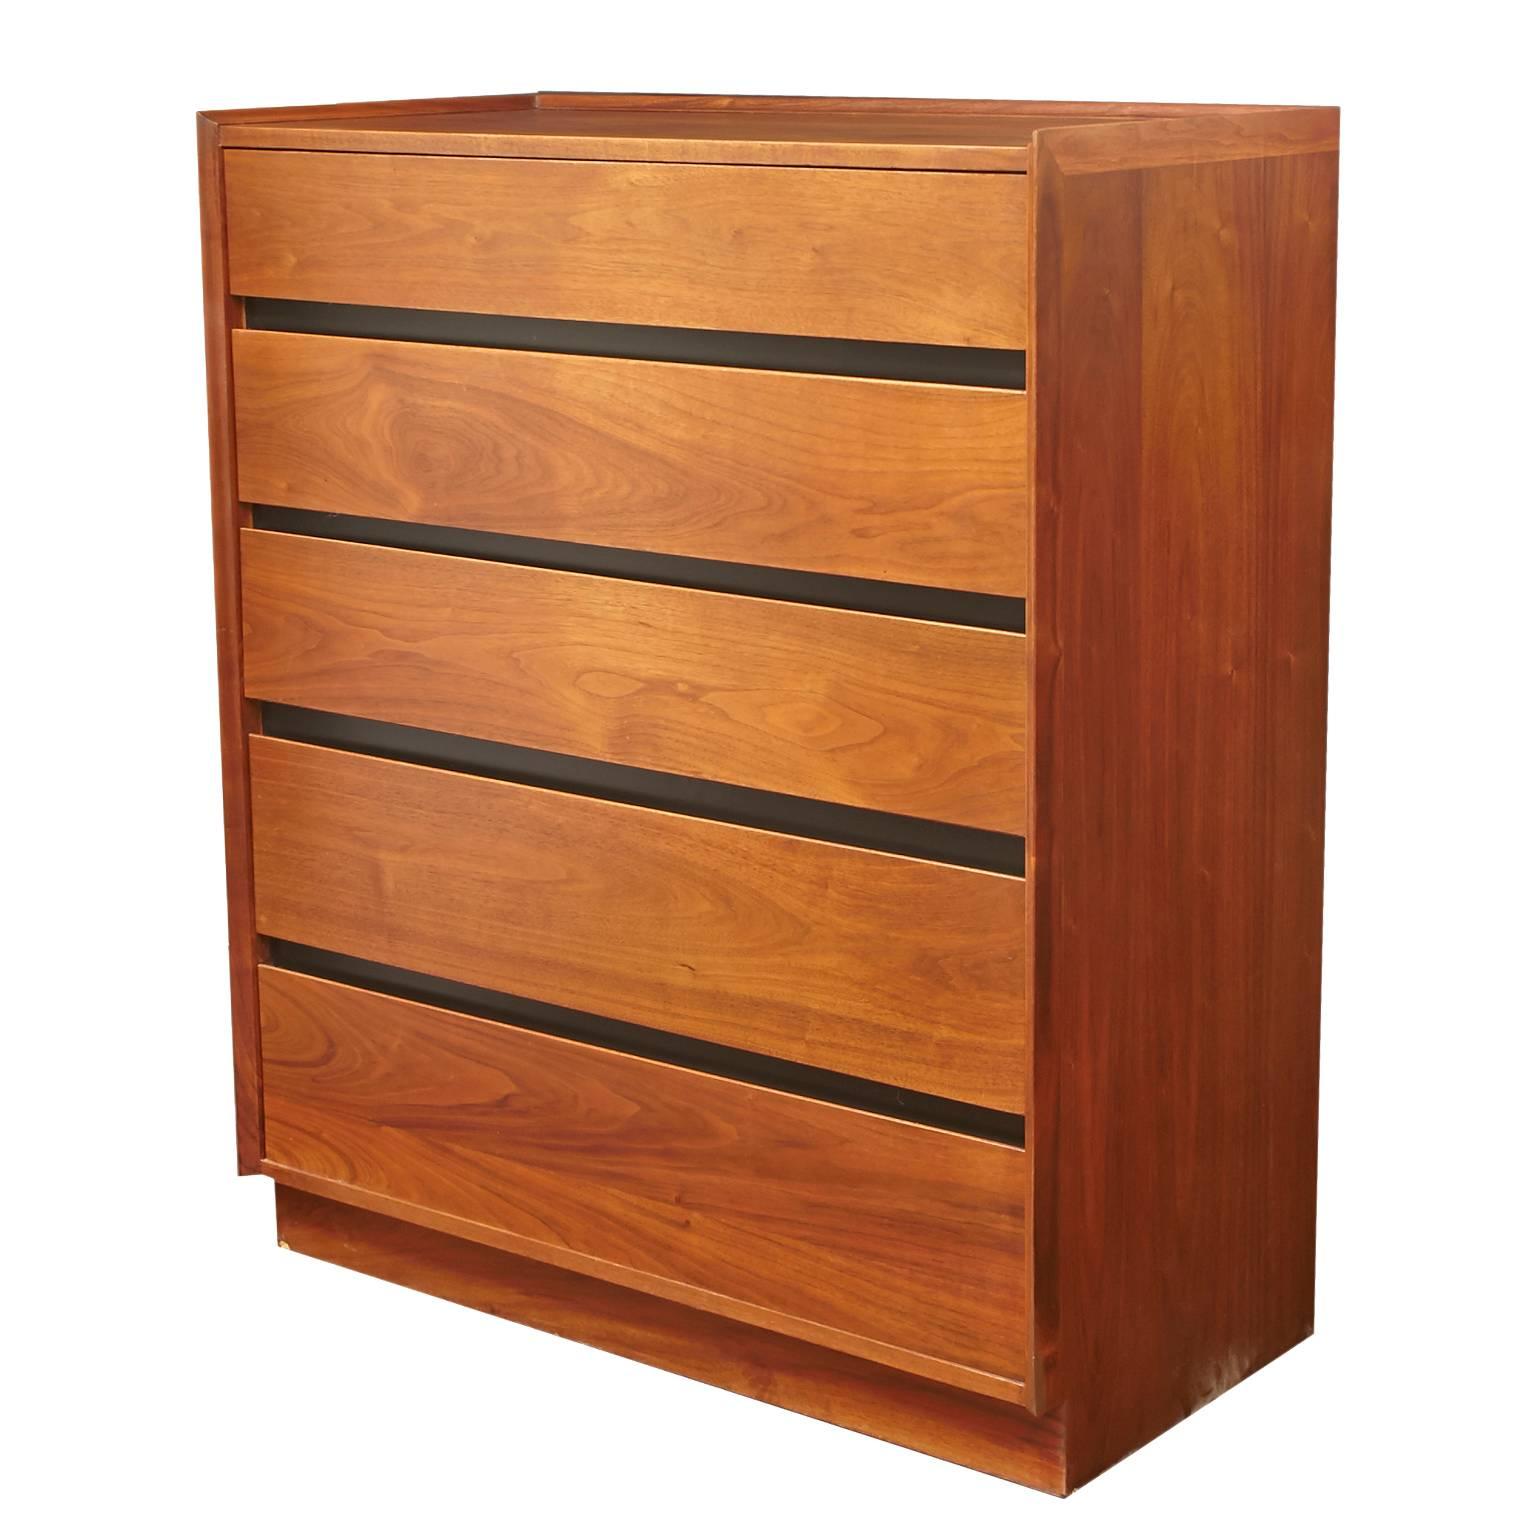 Dillingham walnut Mid-Century Modern five-drawer dresser. Lightly refinished.
Designed by Merton Gershun. Also available in separate listing is a Dillingham gentleman's dresser with mirror.